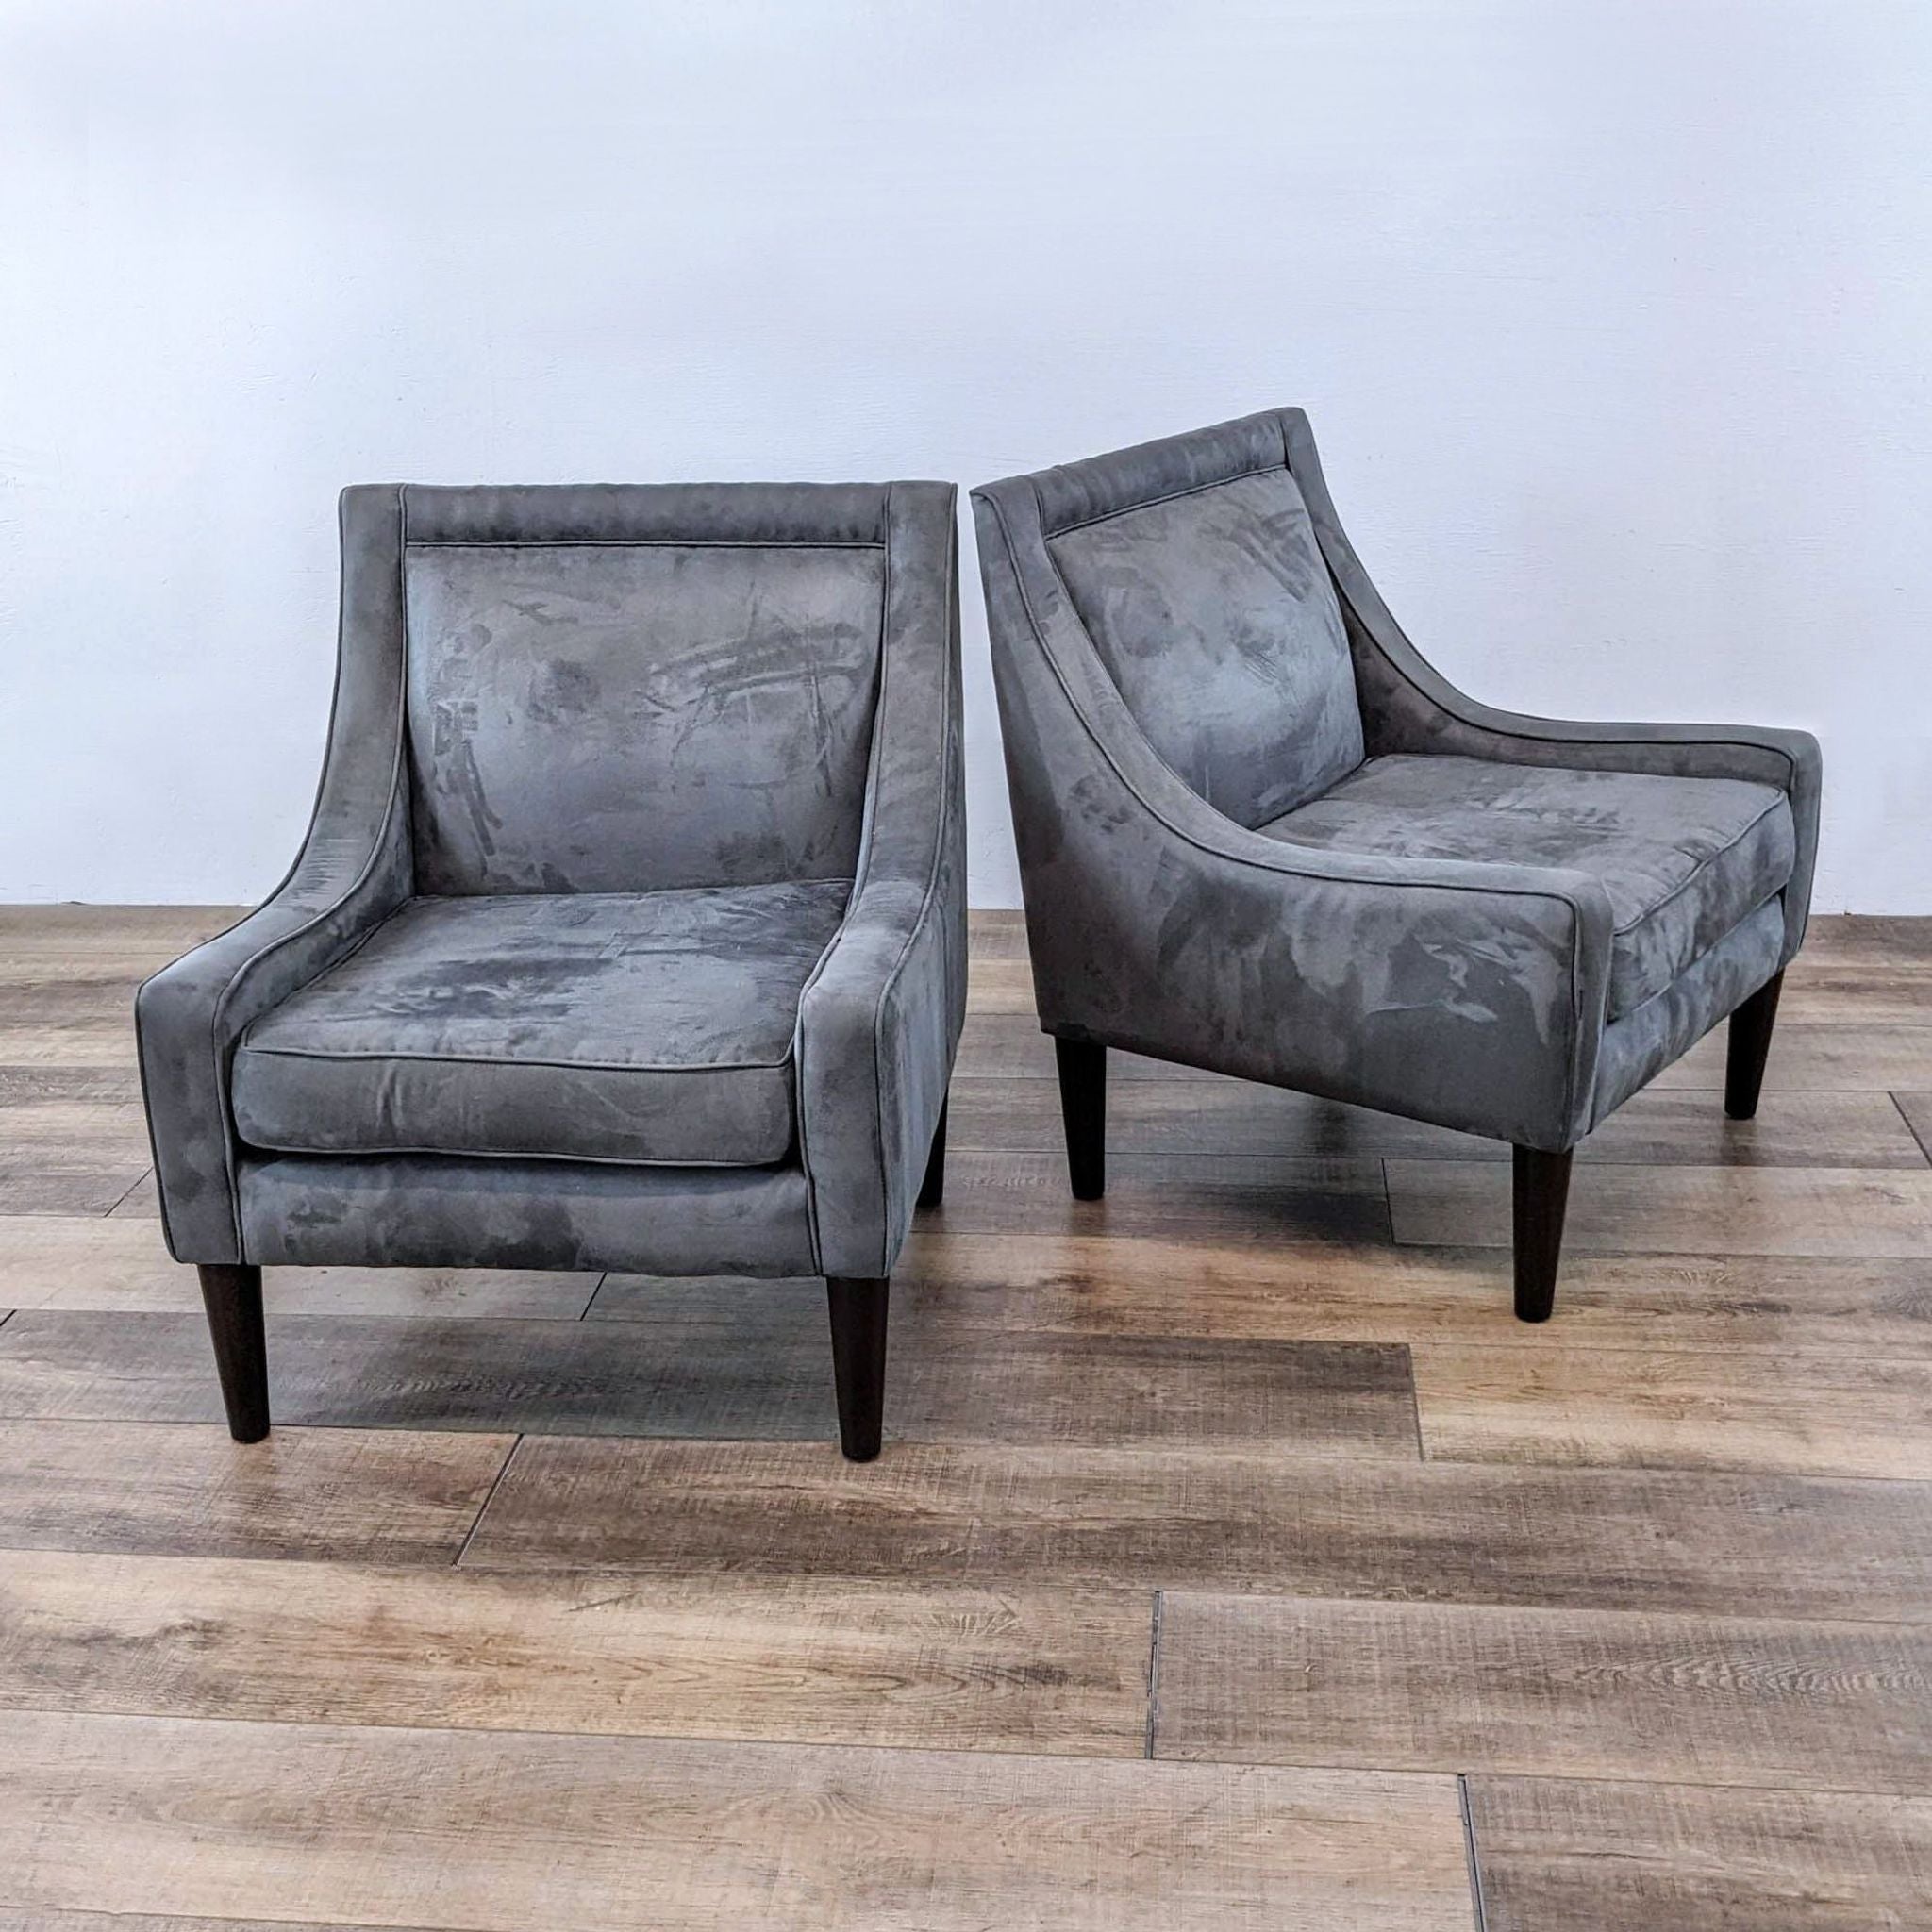 Skyline Furniture armchairs with plush seating and sloped narrow arms, tapered wood legs on a wooden floor.